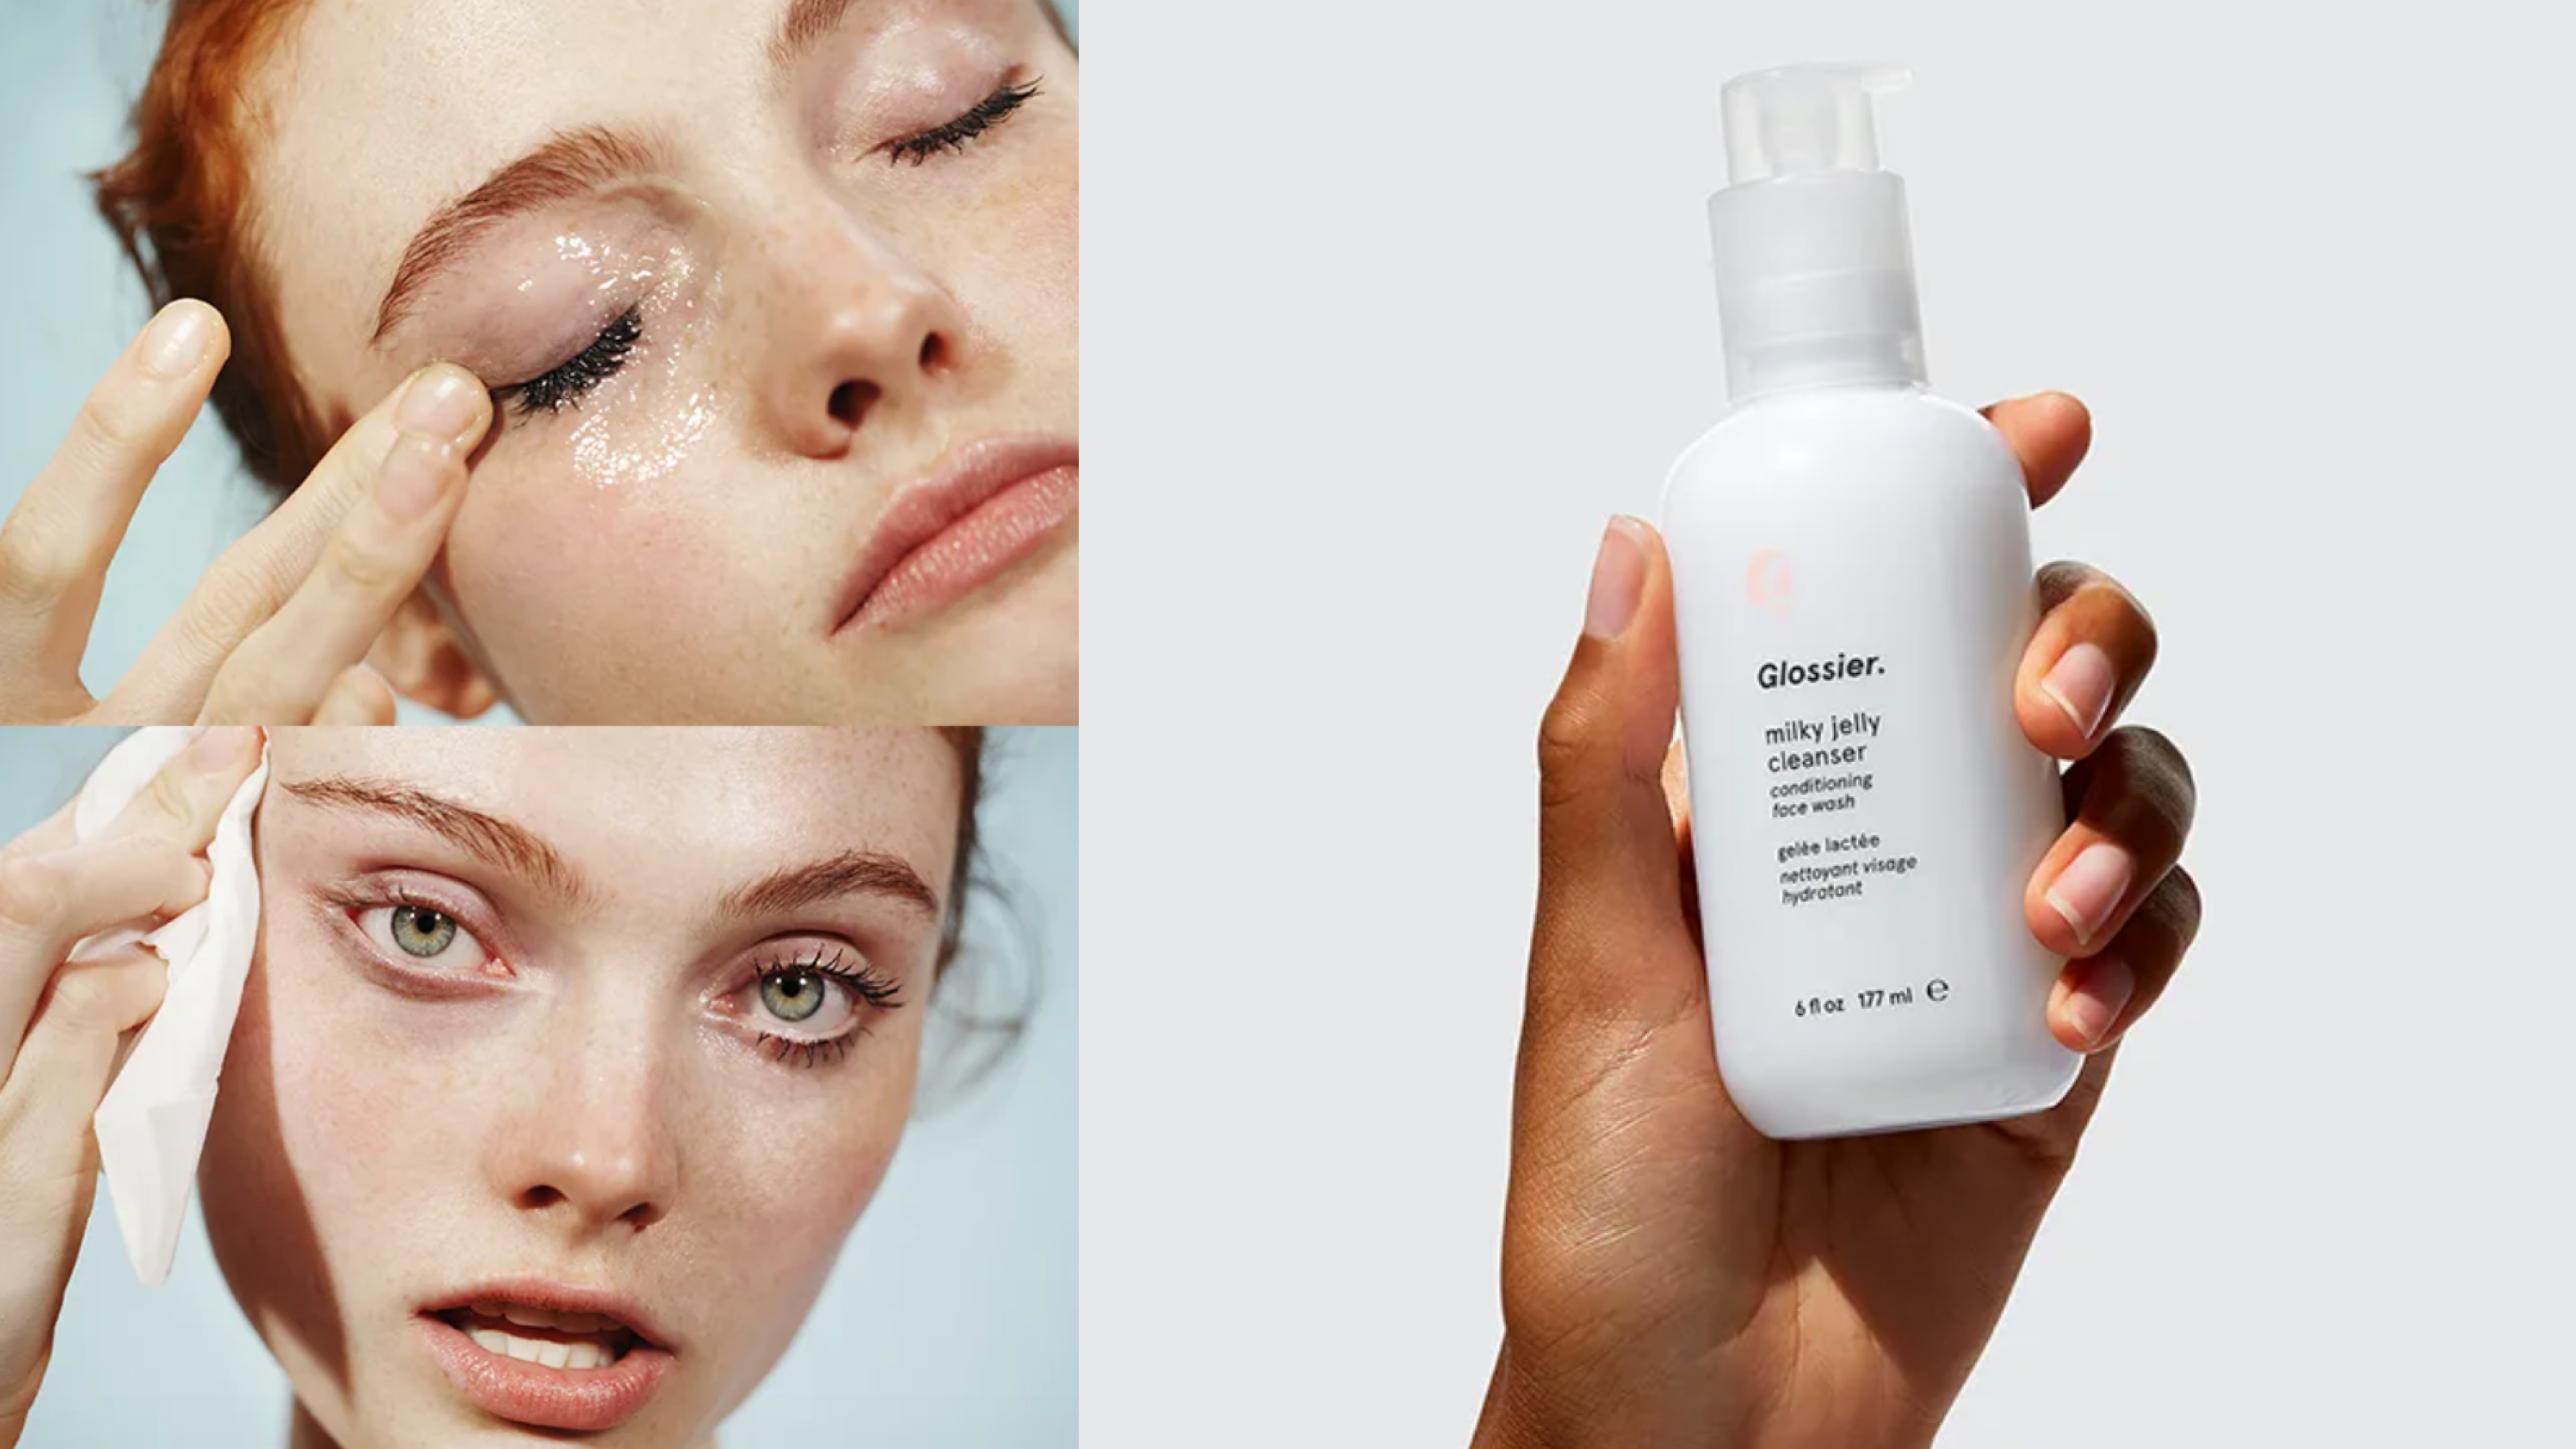 glossier gelly cleanser for dirt and makeup